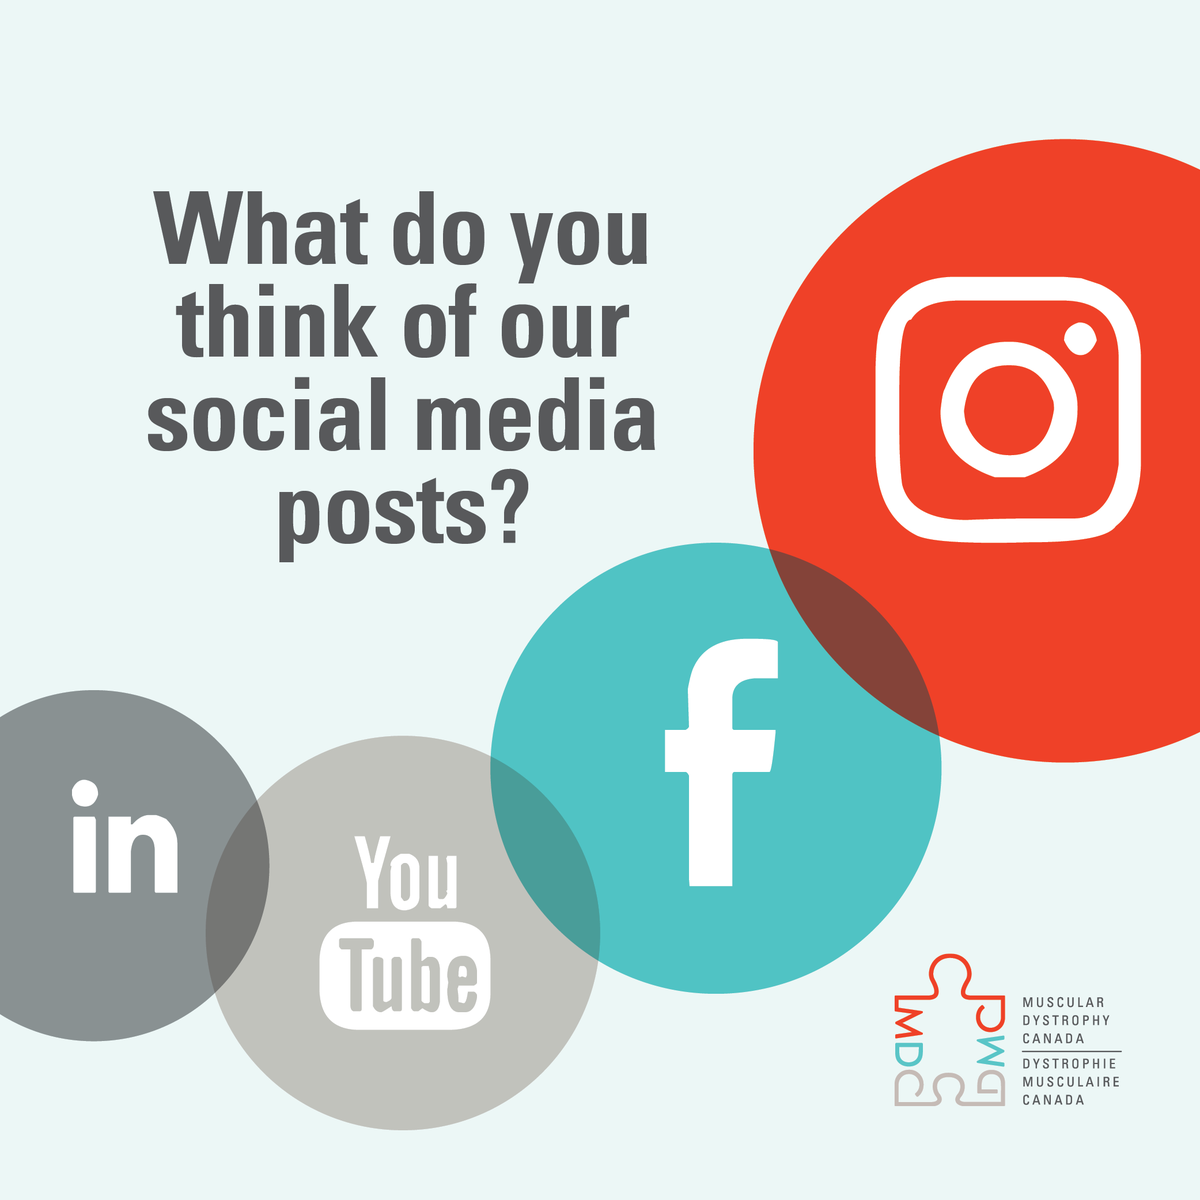 Do you like text and images or are you a fan of videos and reels? Tell us in our survey. We want to know what you think of our social media posts. surveymonkey.com/r/MDCSocialMed…